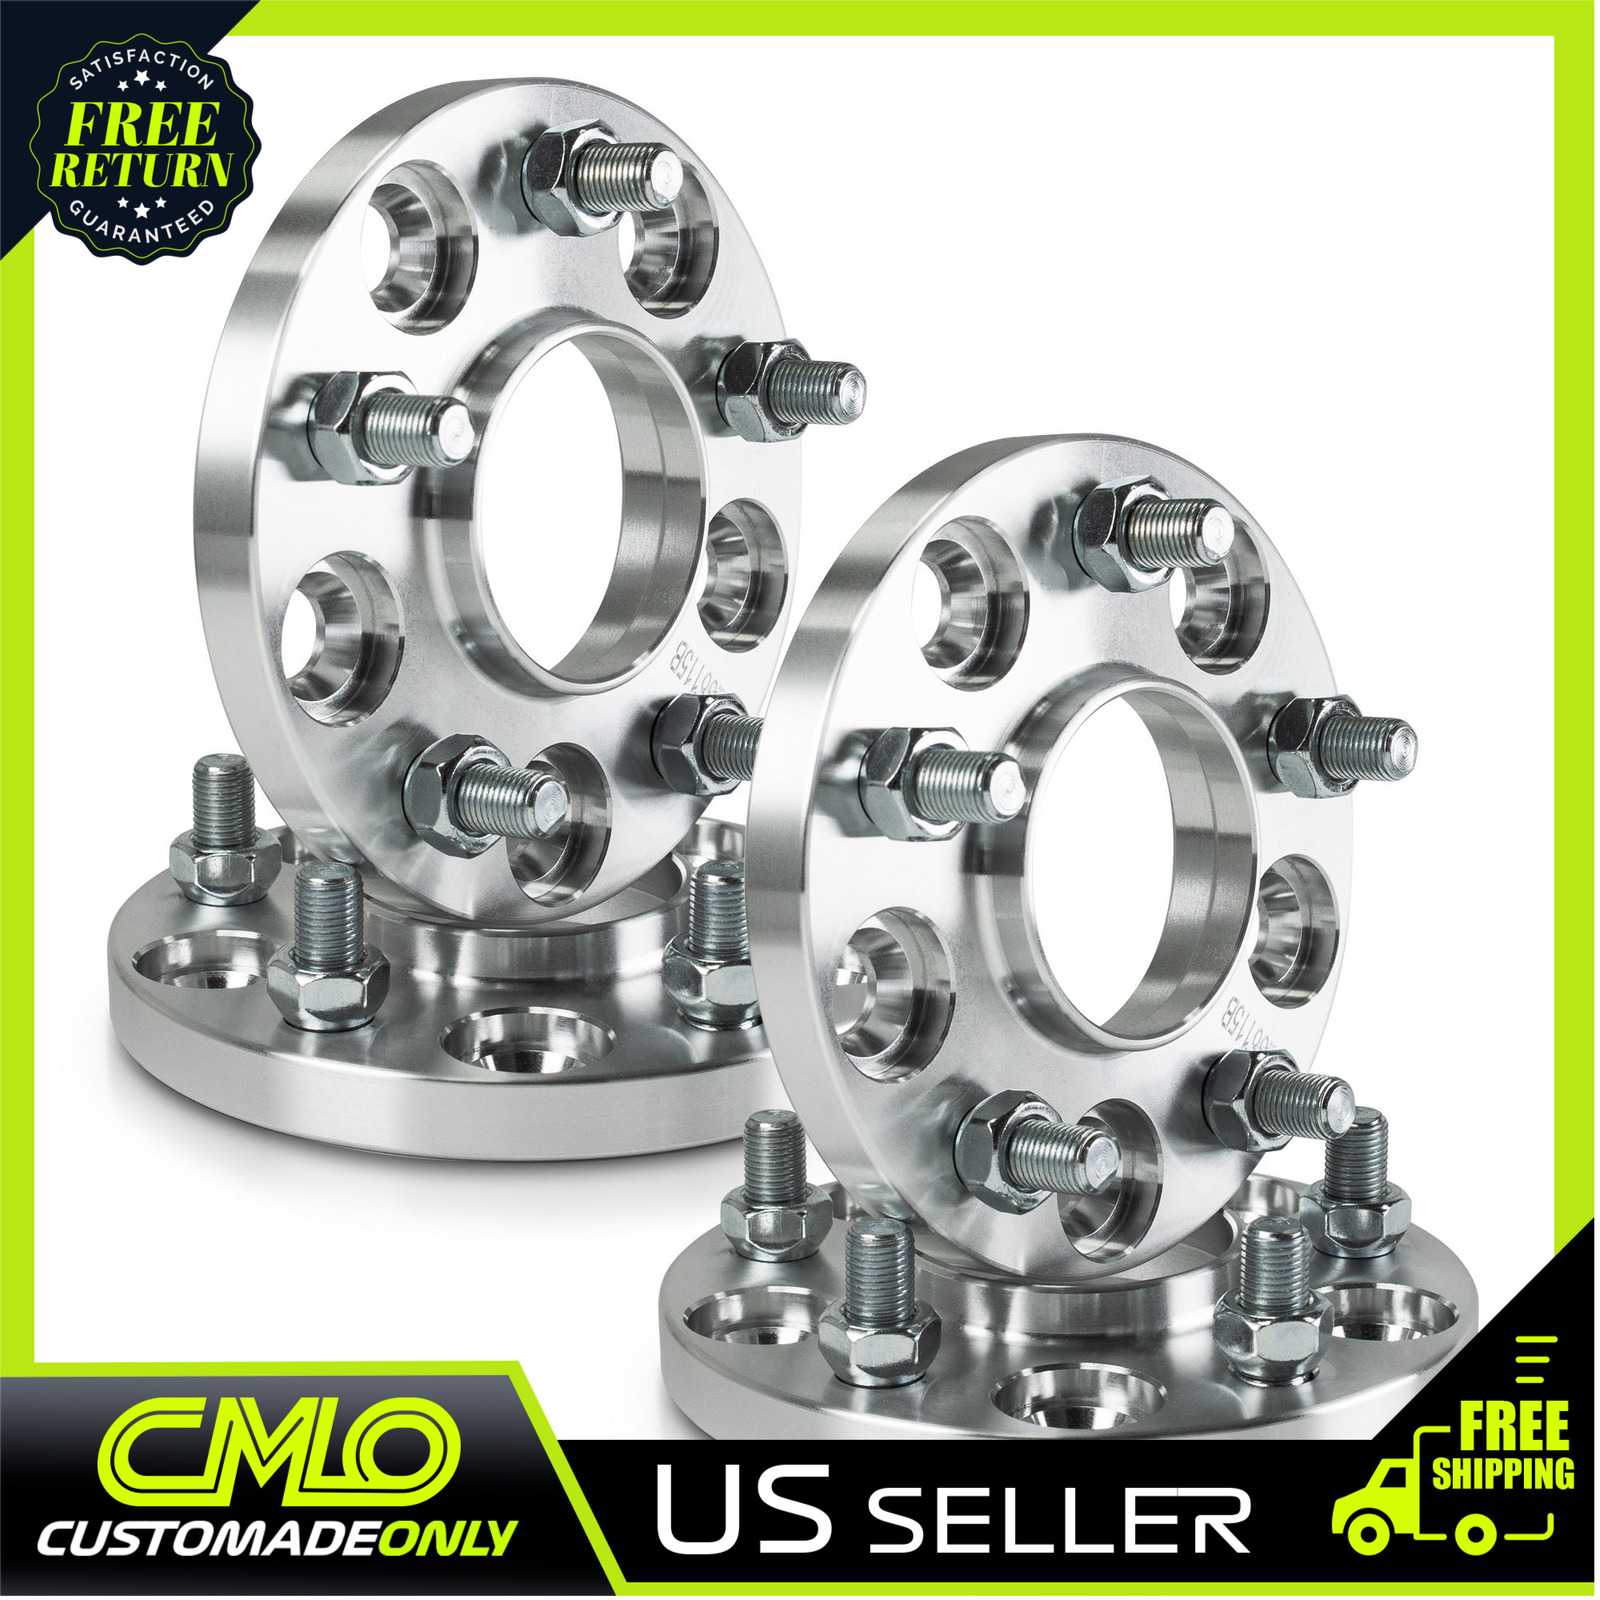 4) 15mm Hubcentric Wheel Spacers 5x120 For 2010-On Camaro Corvette C8 CTS ATS G8